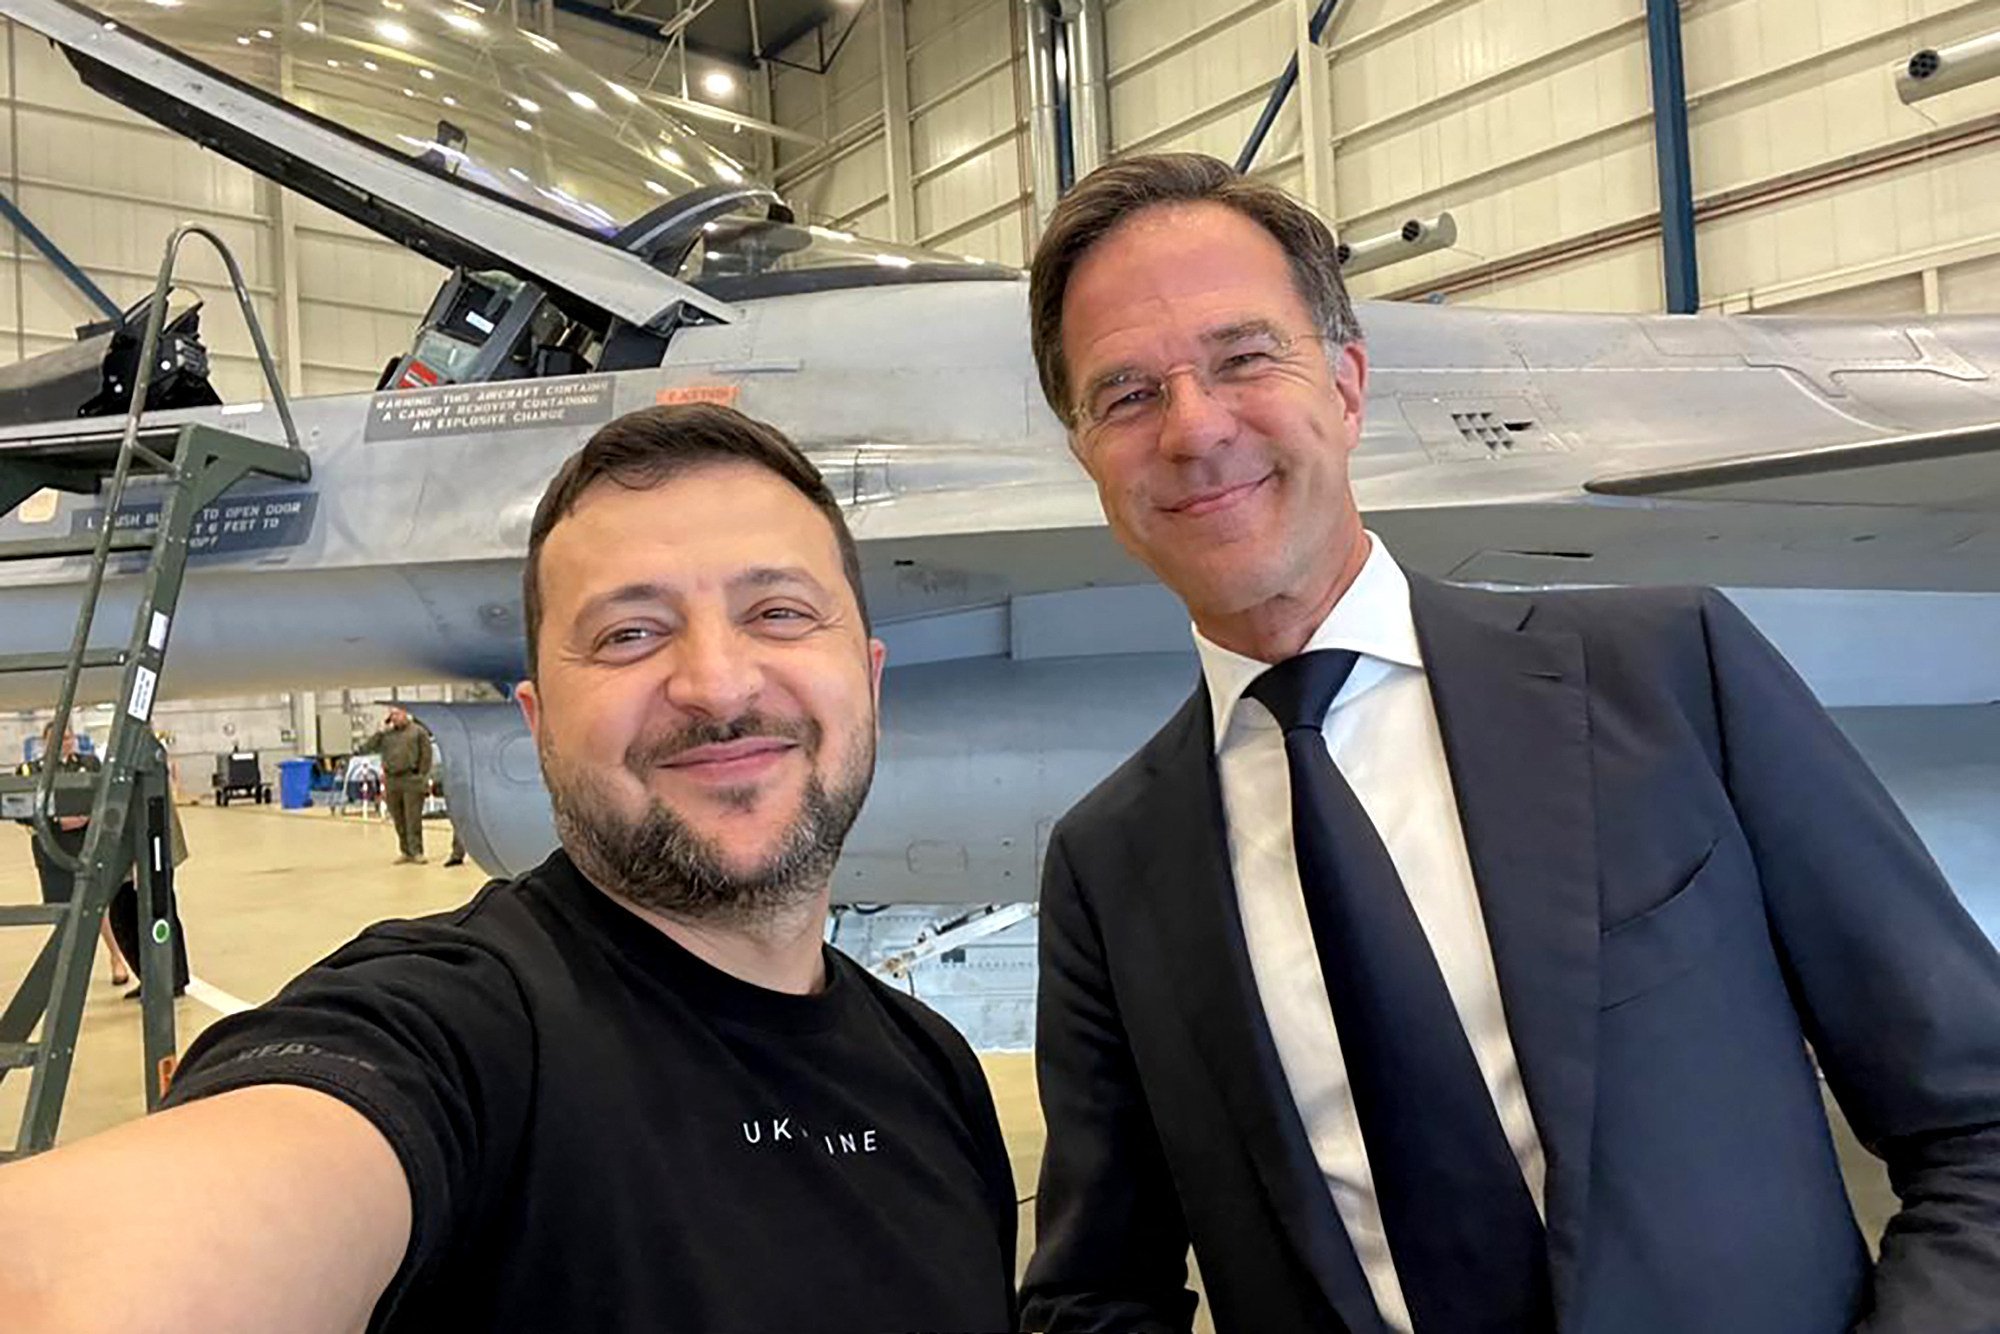 Ukraine’s President Volodymyr Zelensky (left) takes a selfie with Dutch Prime Minister Mark Rutte during a visit to the Eindhoven Military Air Base in Eindhoven on Sunday. Photo: Ukrainian Presidential Press Service/AFP